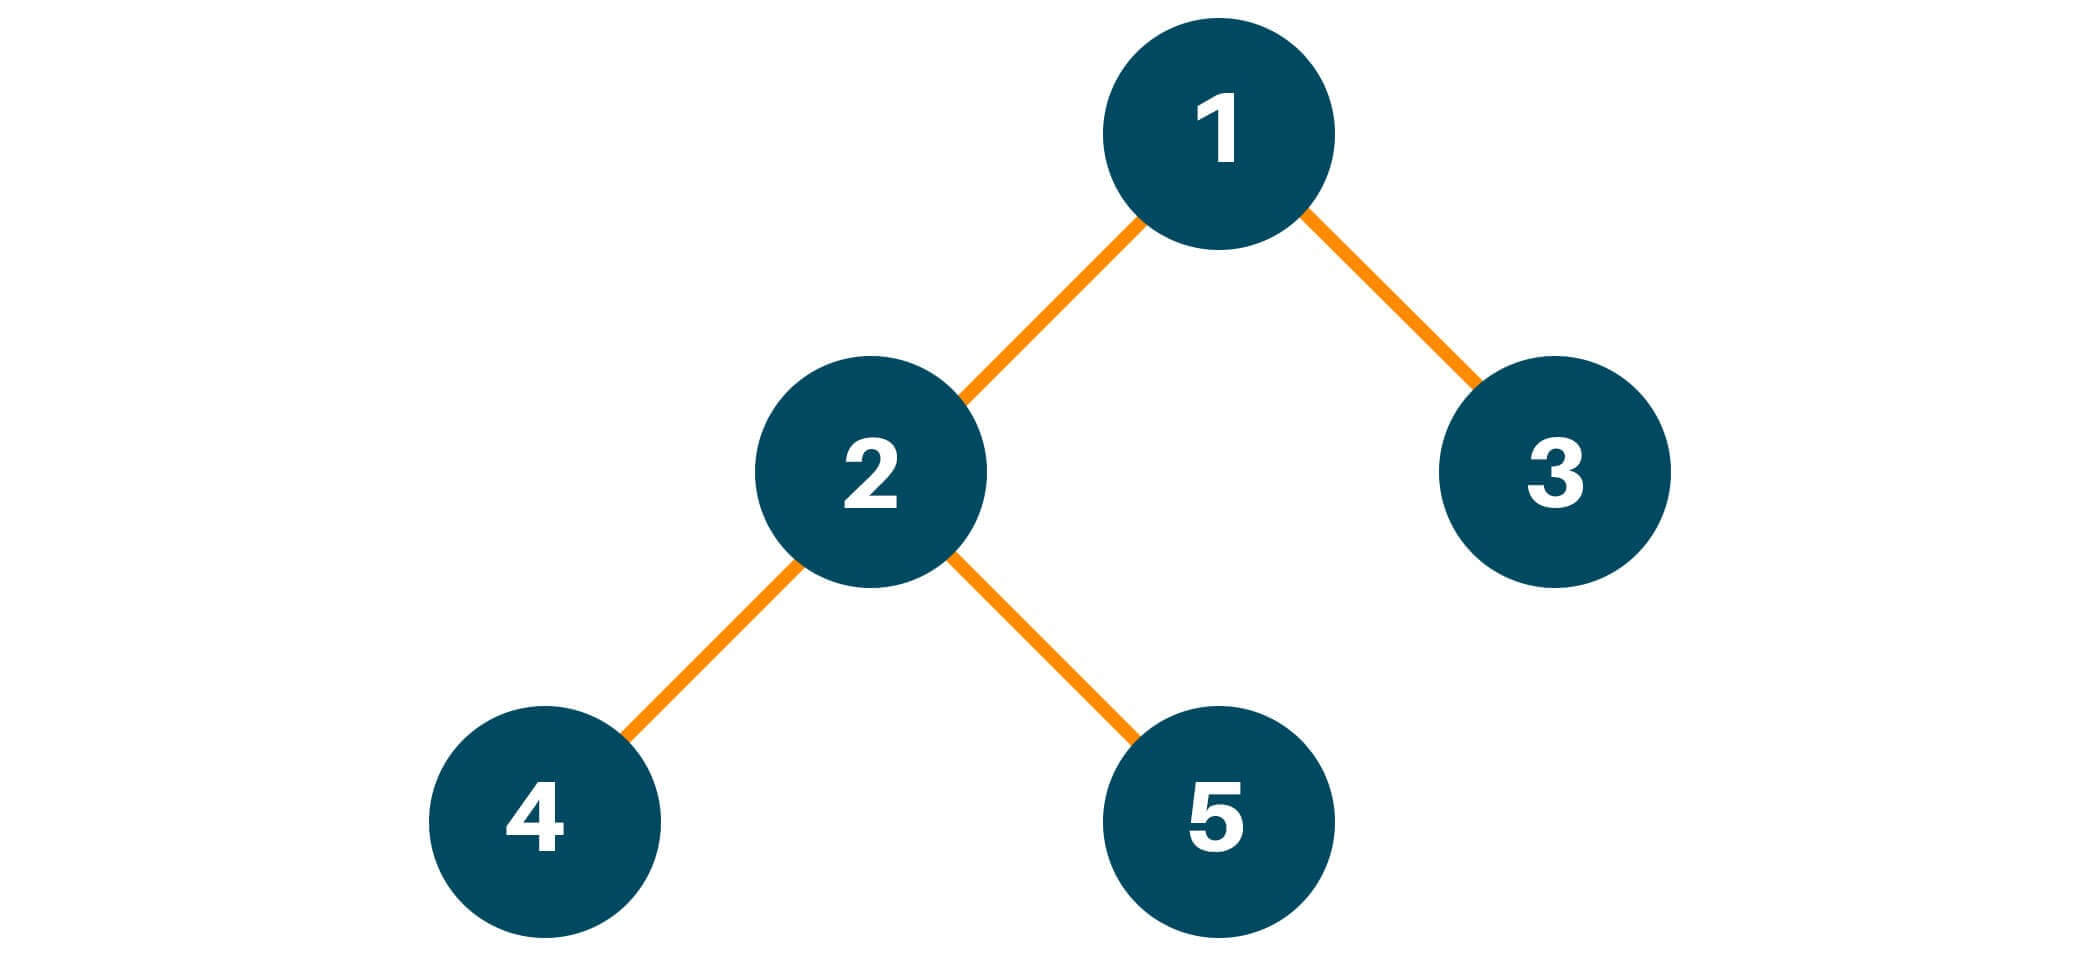 Resulting array after traversing the root node